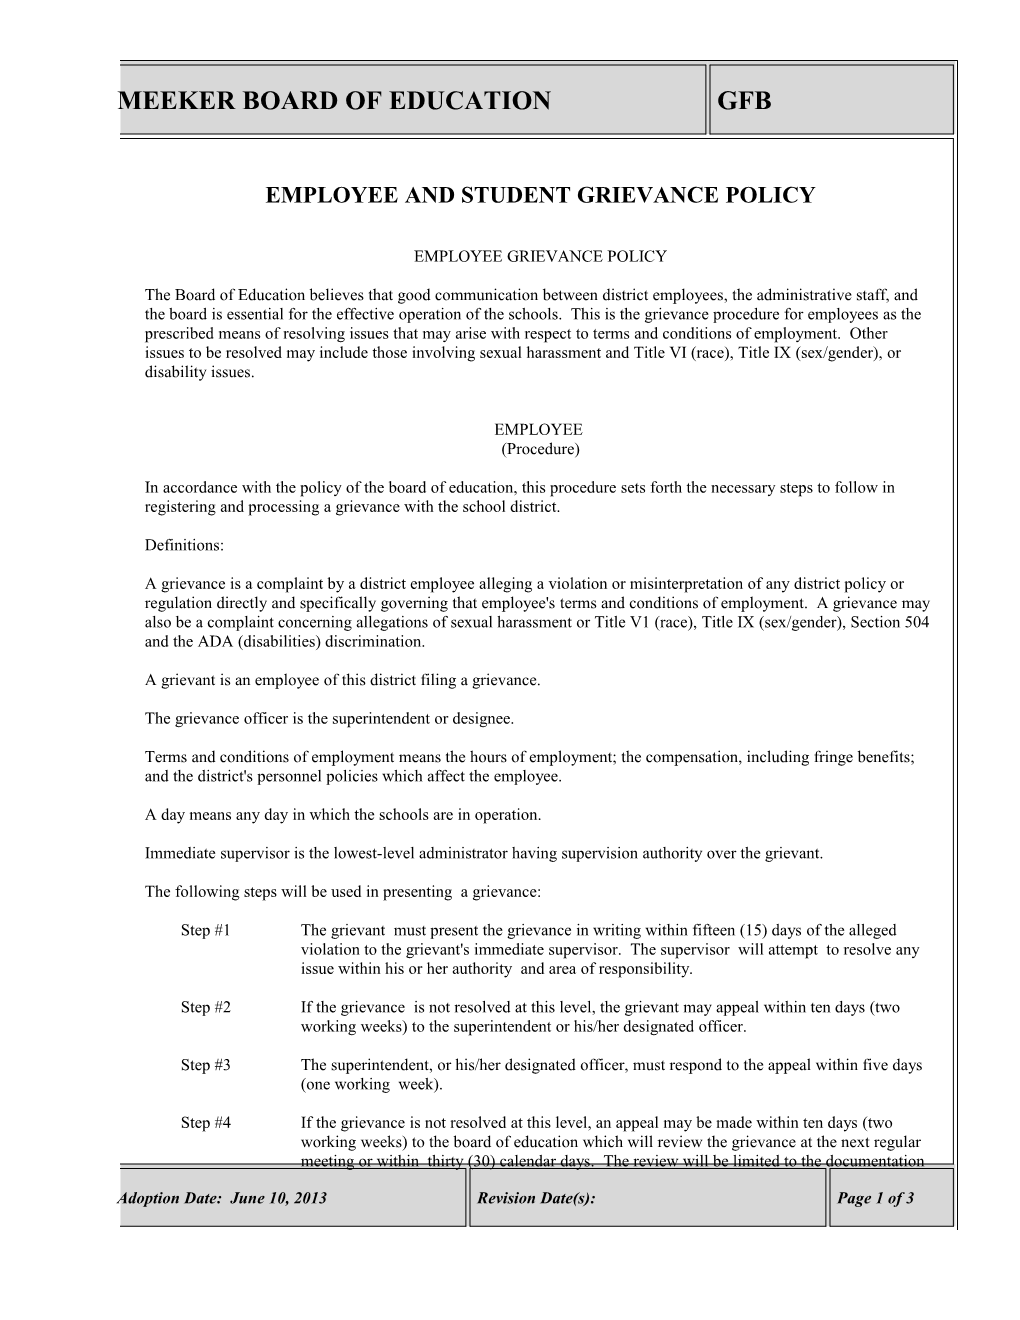 Employee and Student Grievance Policy